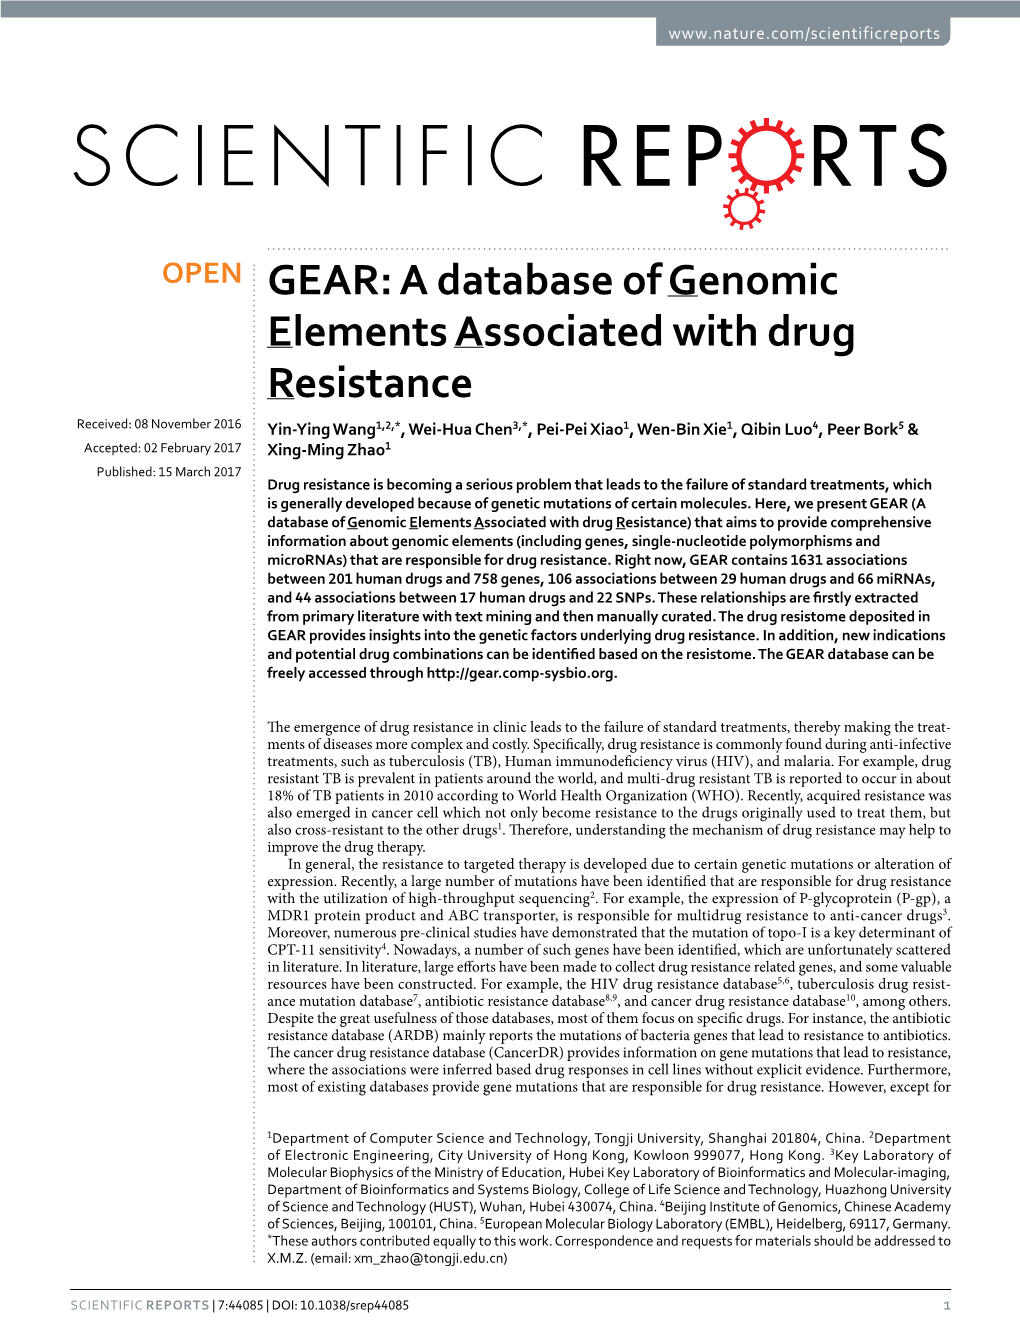 A Database of Genomic Elements Associated with Drug Resistance